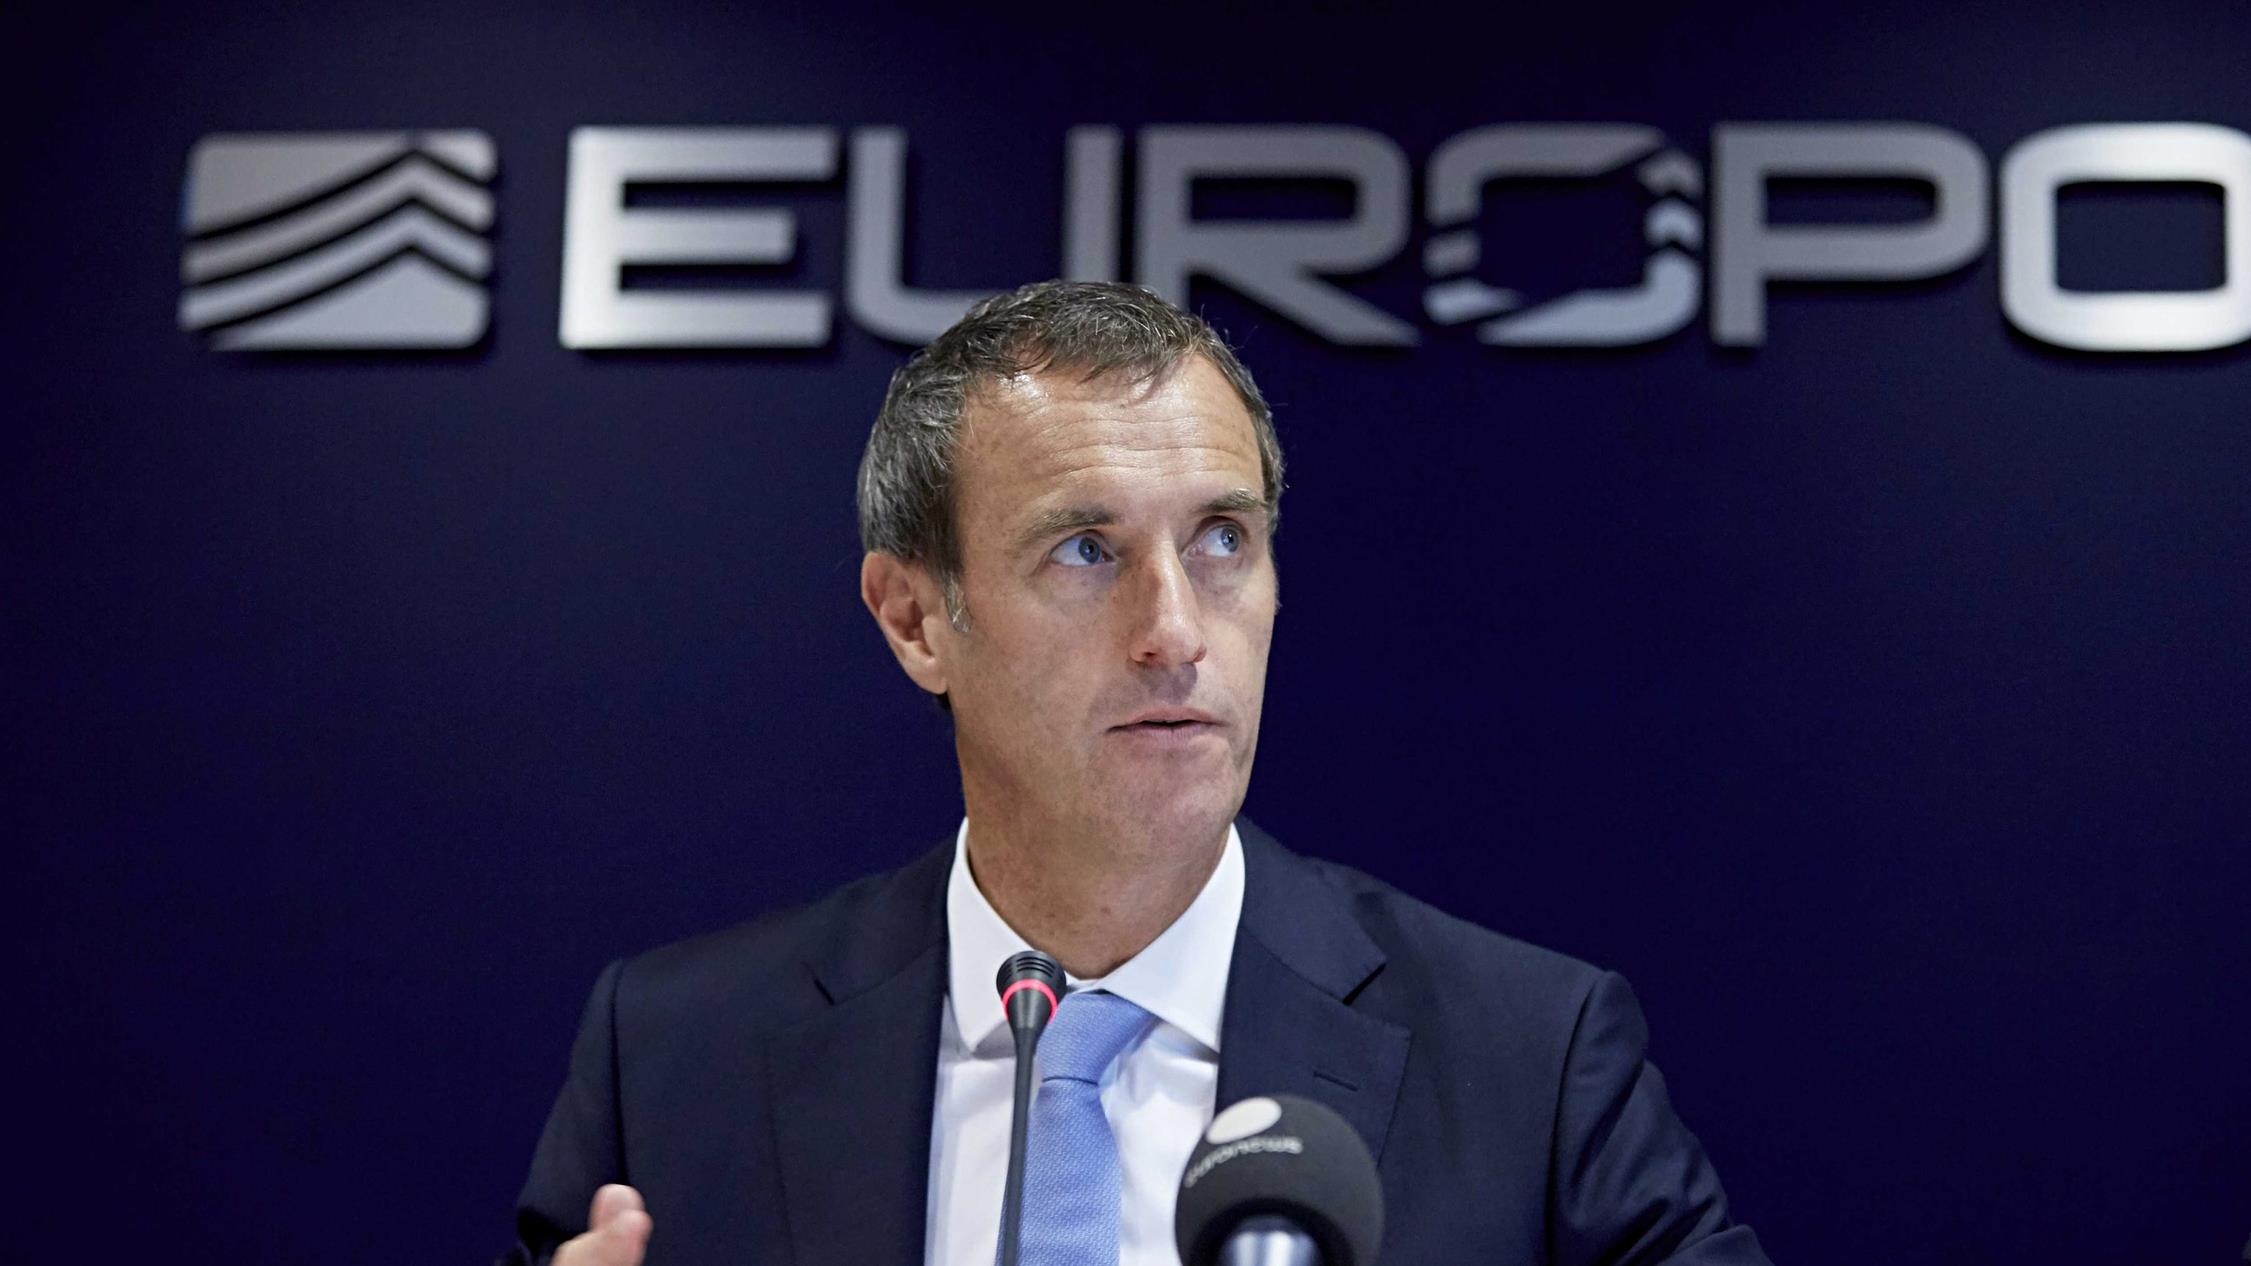 Europol's director: more collaboration between police forces would save more lives